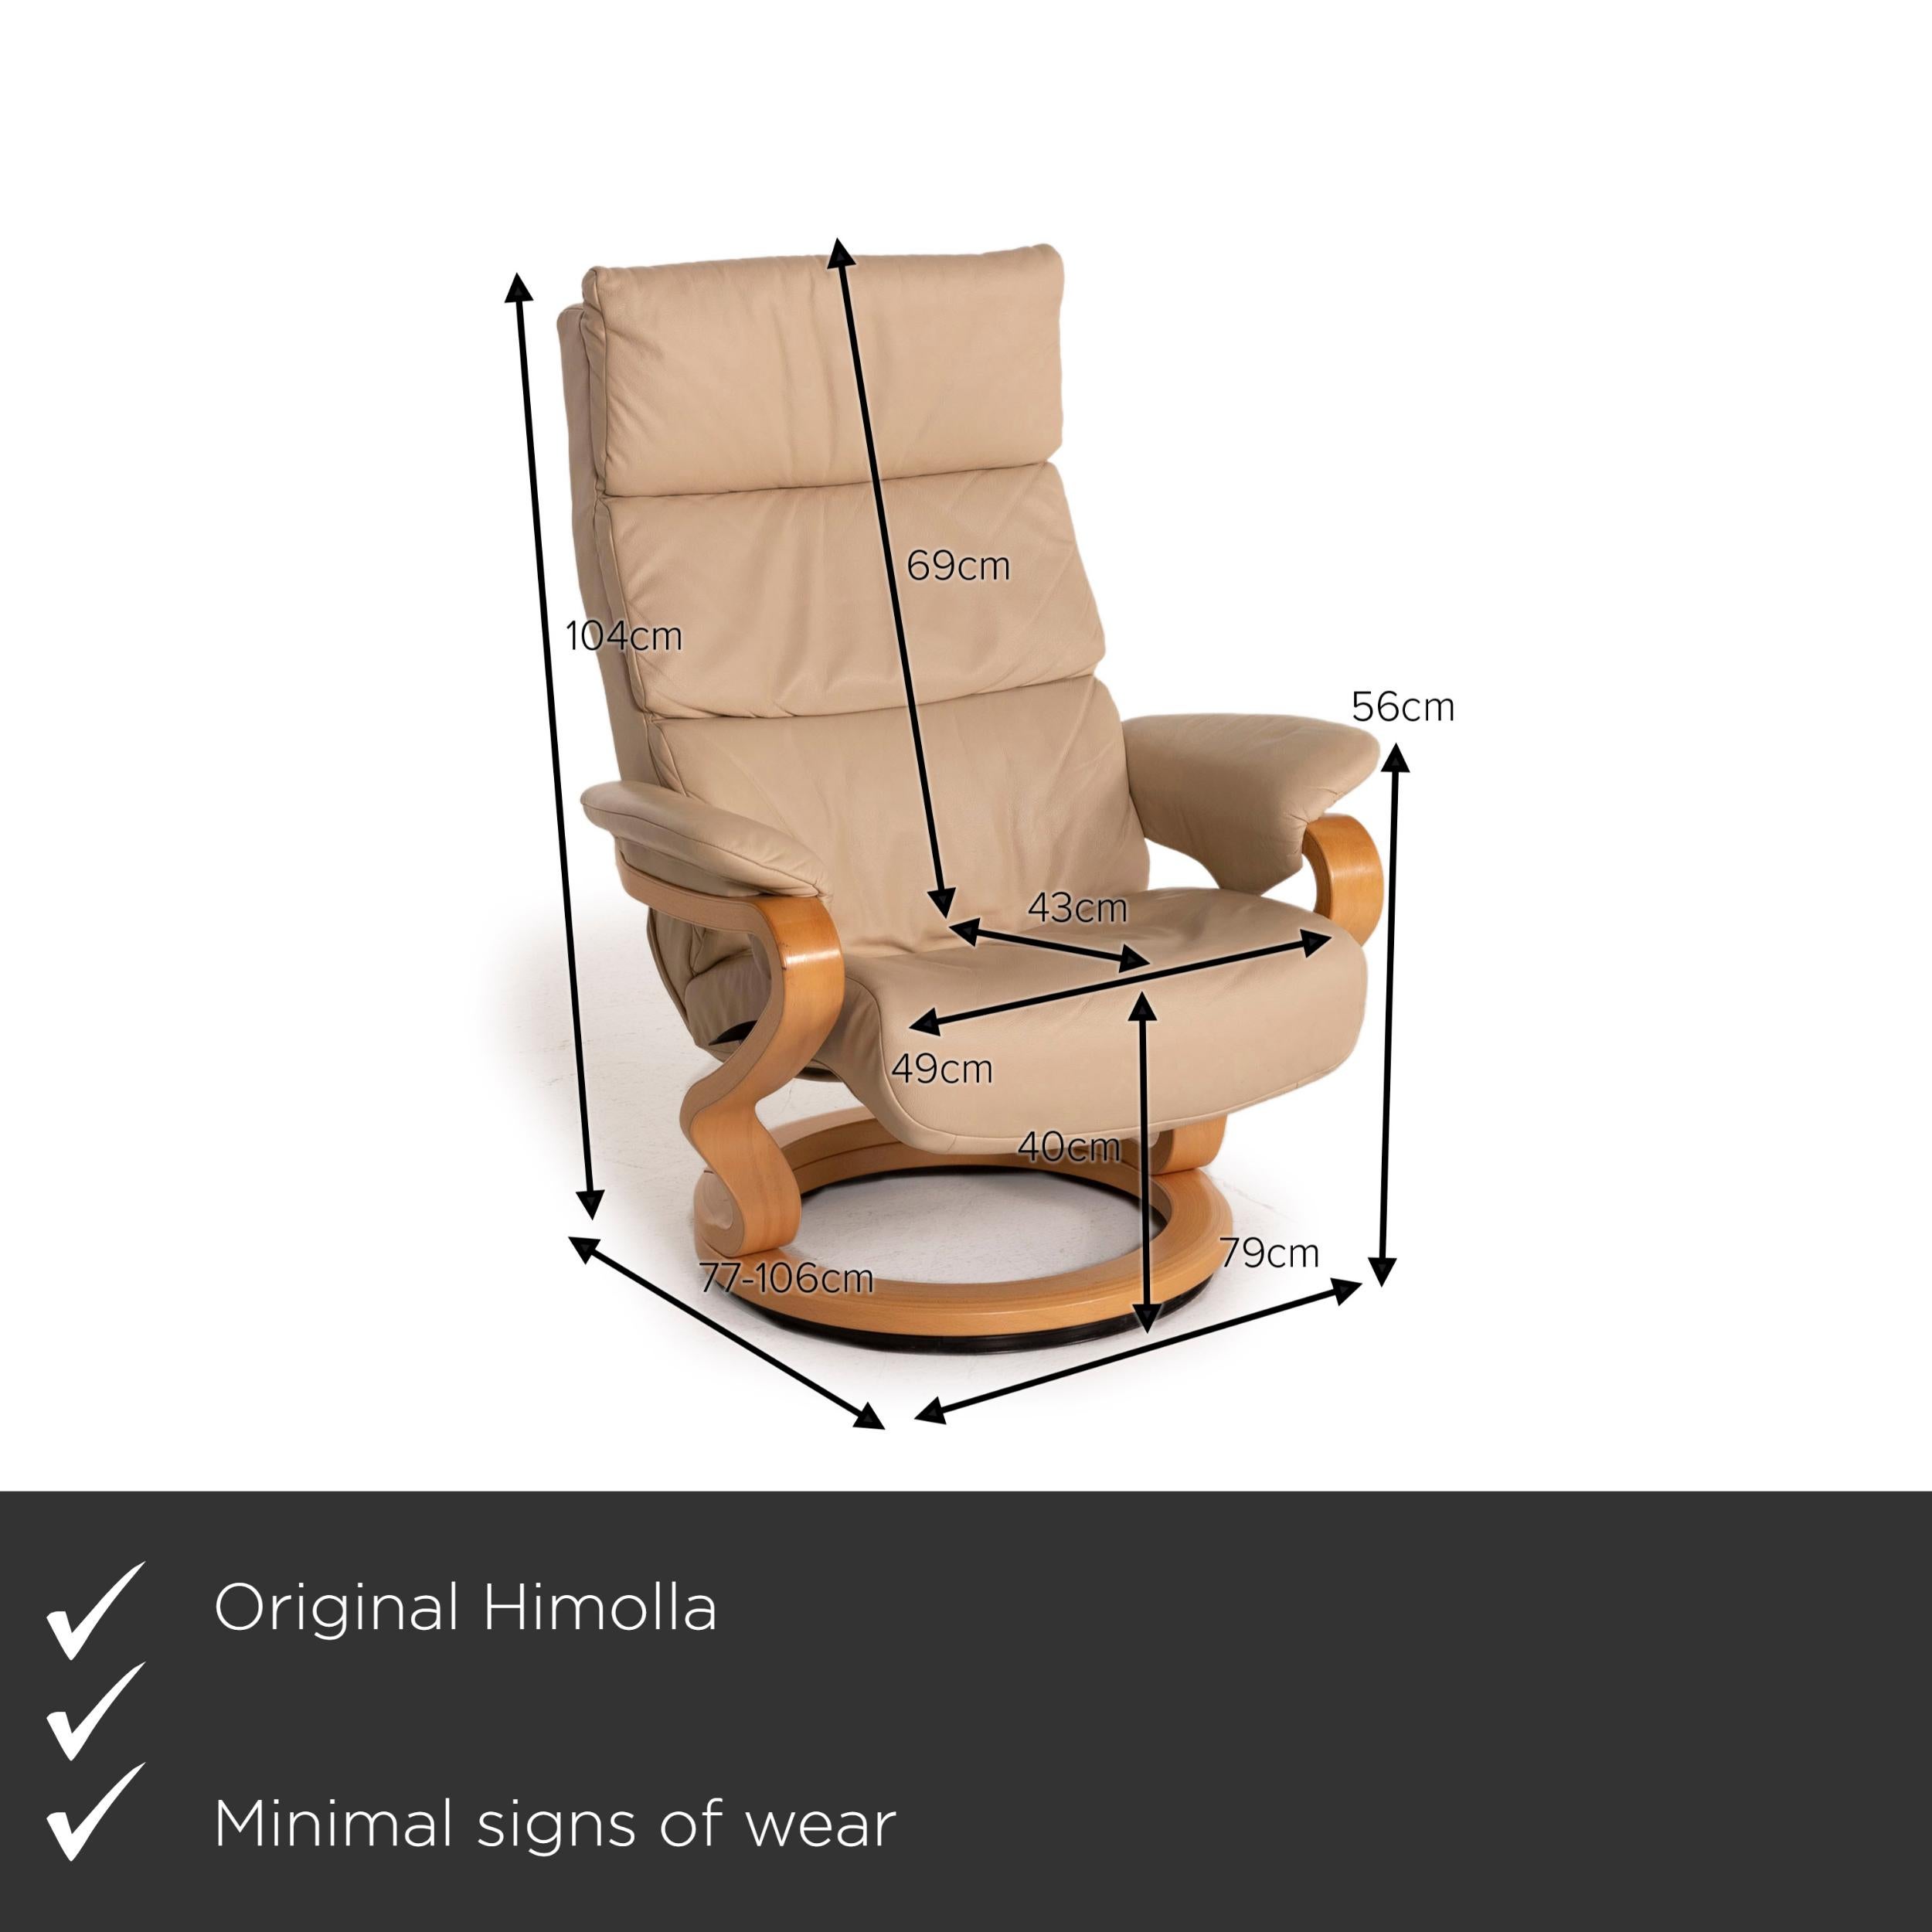 We present to you a Himolla leather armchair beige function relaxation function.


 Product measurements in centimeters:
 

Depth: 77
Width: 79
Height: 104
Seat height: 40
Rest height: 56
Seat depth: 43
Seat width: 49
Back height: 69.
 